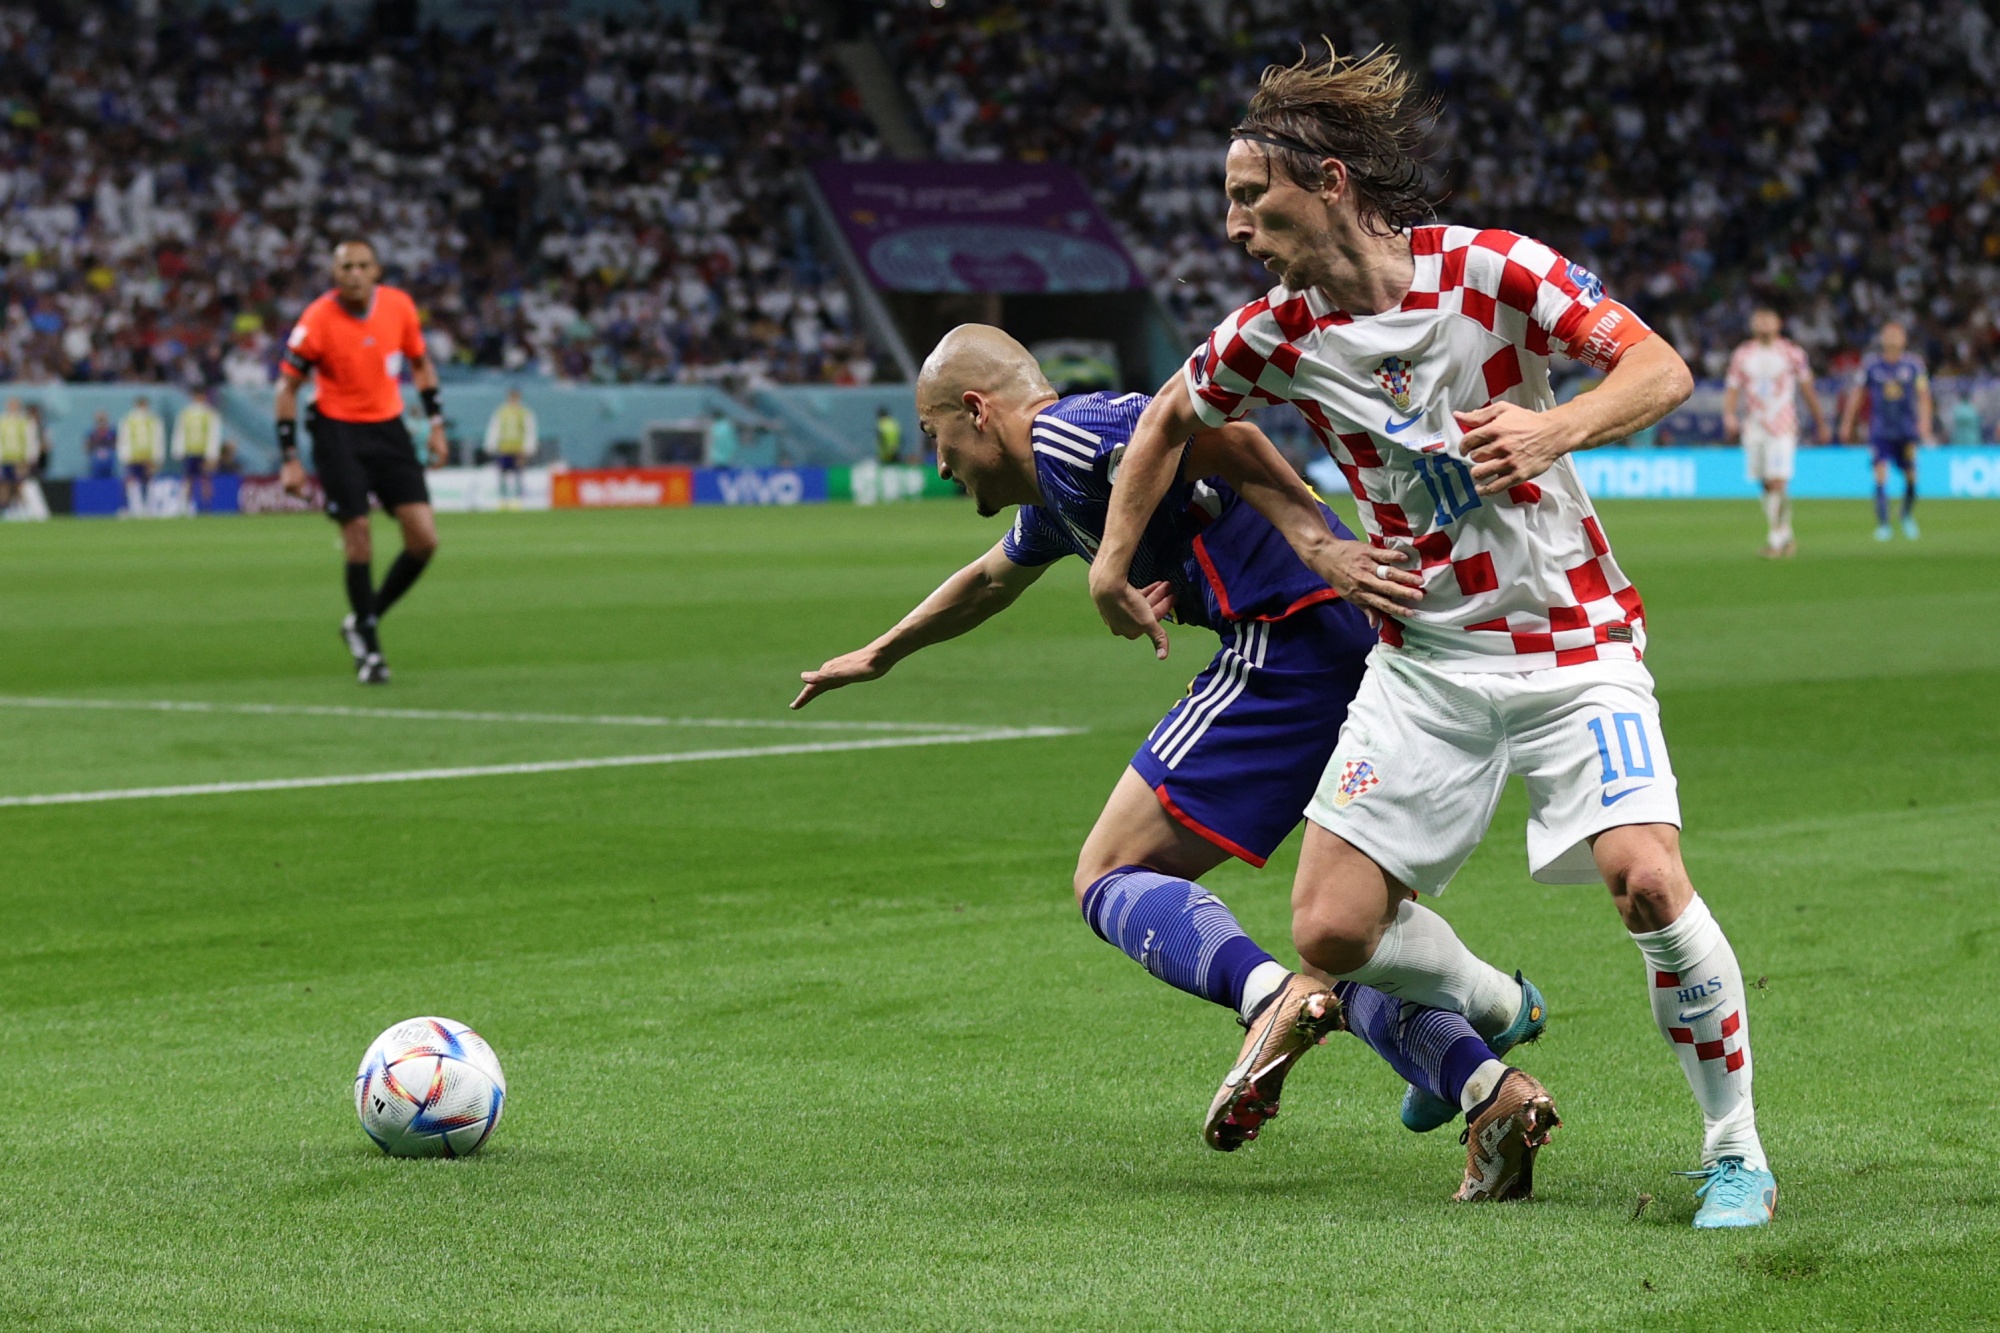 Croatia's midfielder #10 Luka Modric fights for the ball with Japan's forward #25 Daizen Maeda during the Qatar 2022 World Cup round of 16 football match between Japan and Croatia at the Al-Janoub Stadium in Al-Wakrah, south of Doha on December 5, 2022. (Photo by ADRIAN DENNIS / AFP)